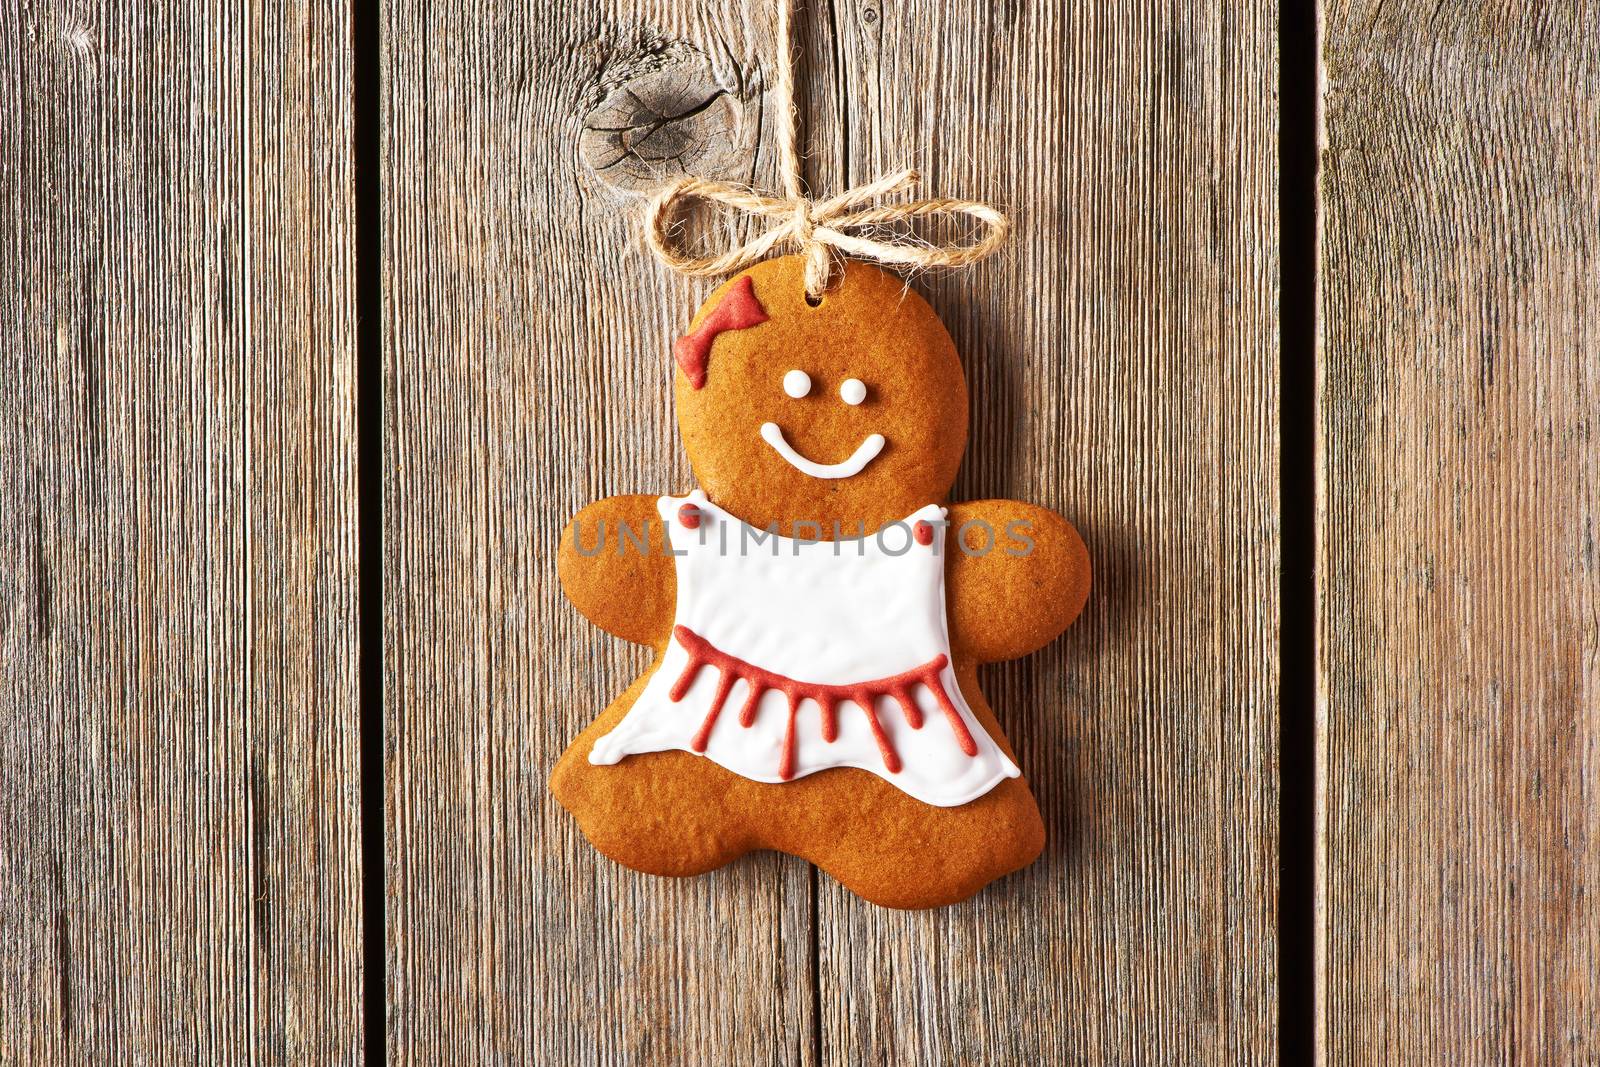 Christmas homemade gingerbread girl cookie by haveseen